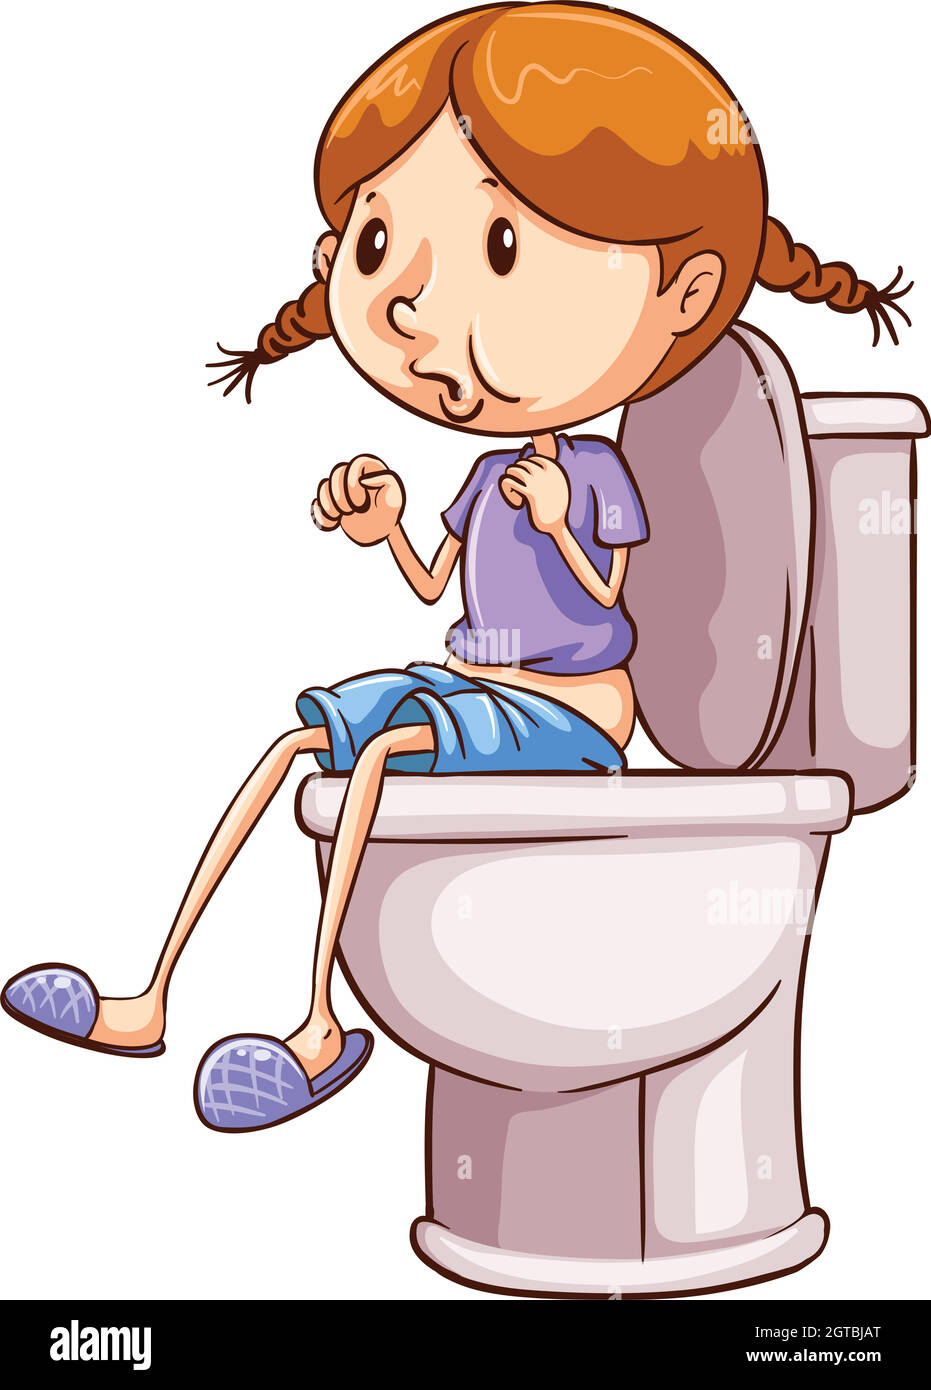 Girl and toilet Stock Vector